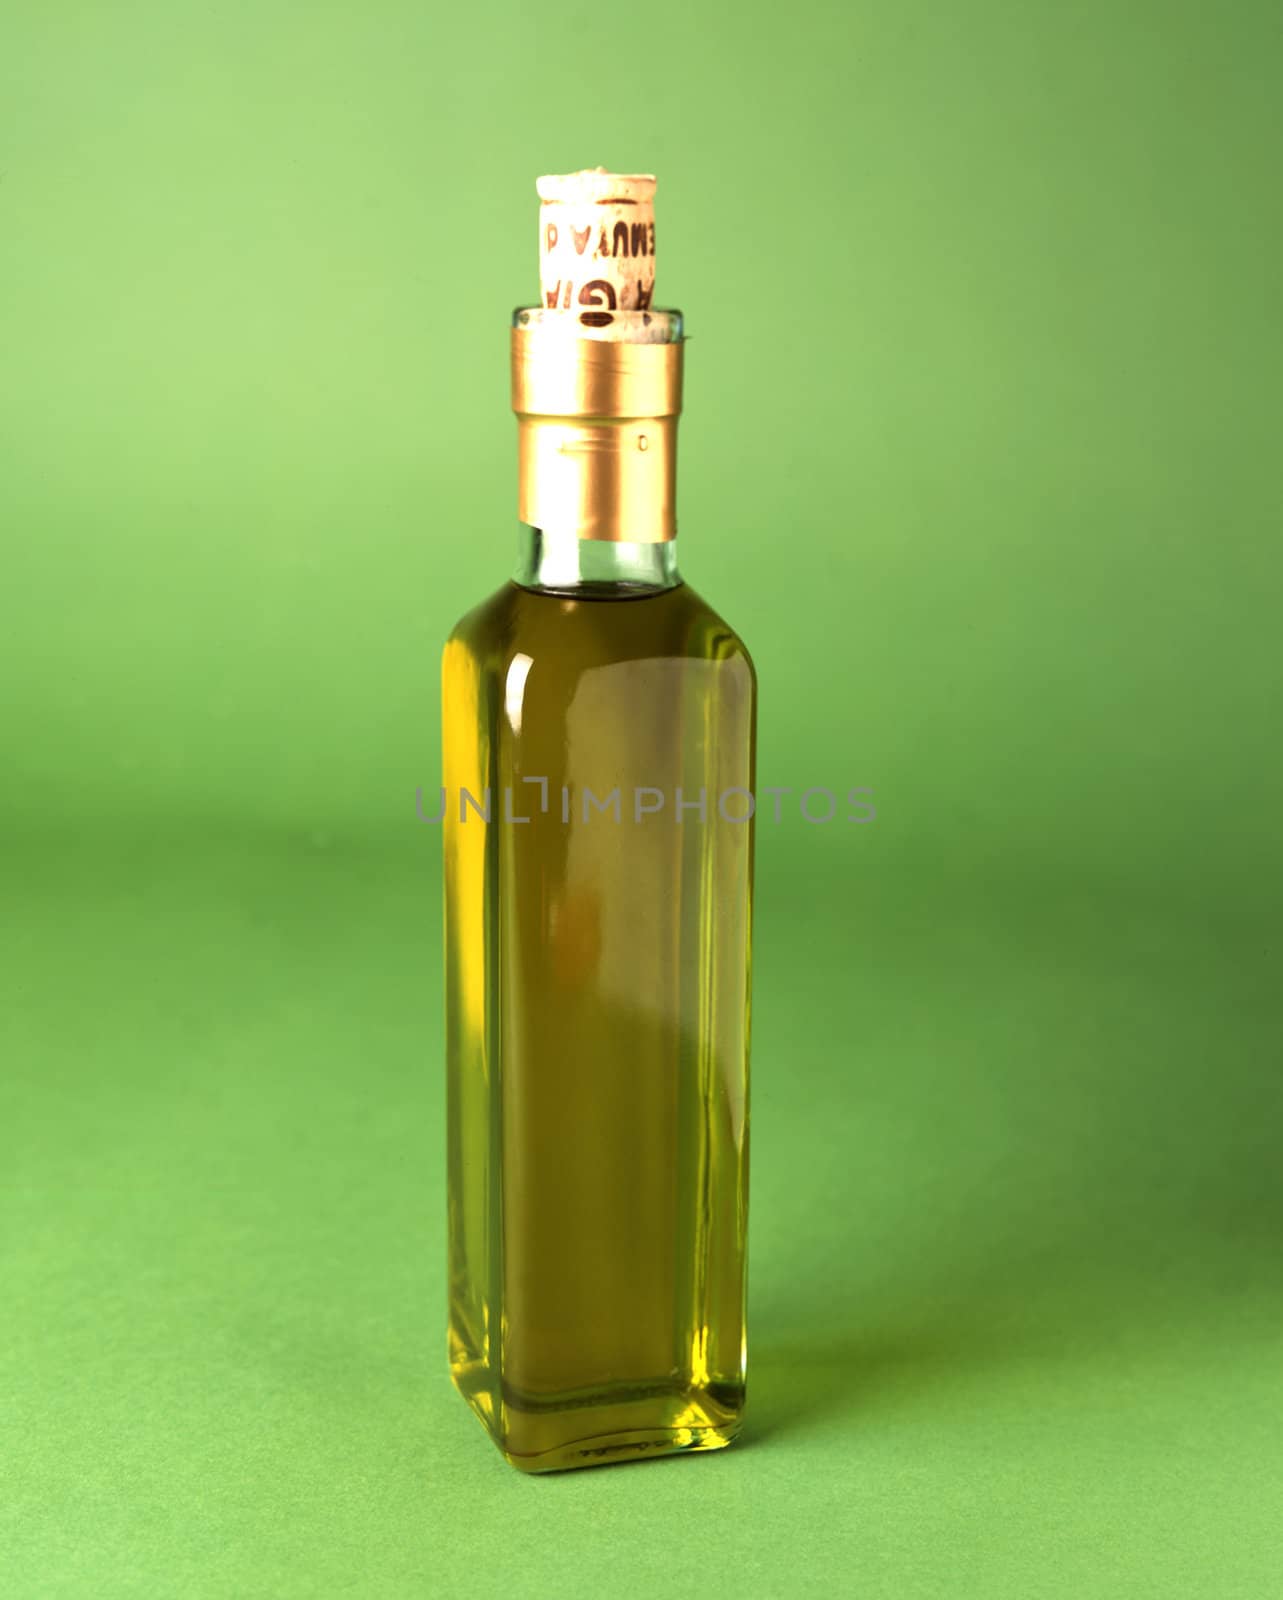 Glass bottle of olive oil with cork on green
